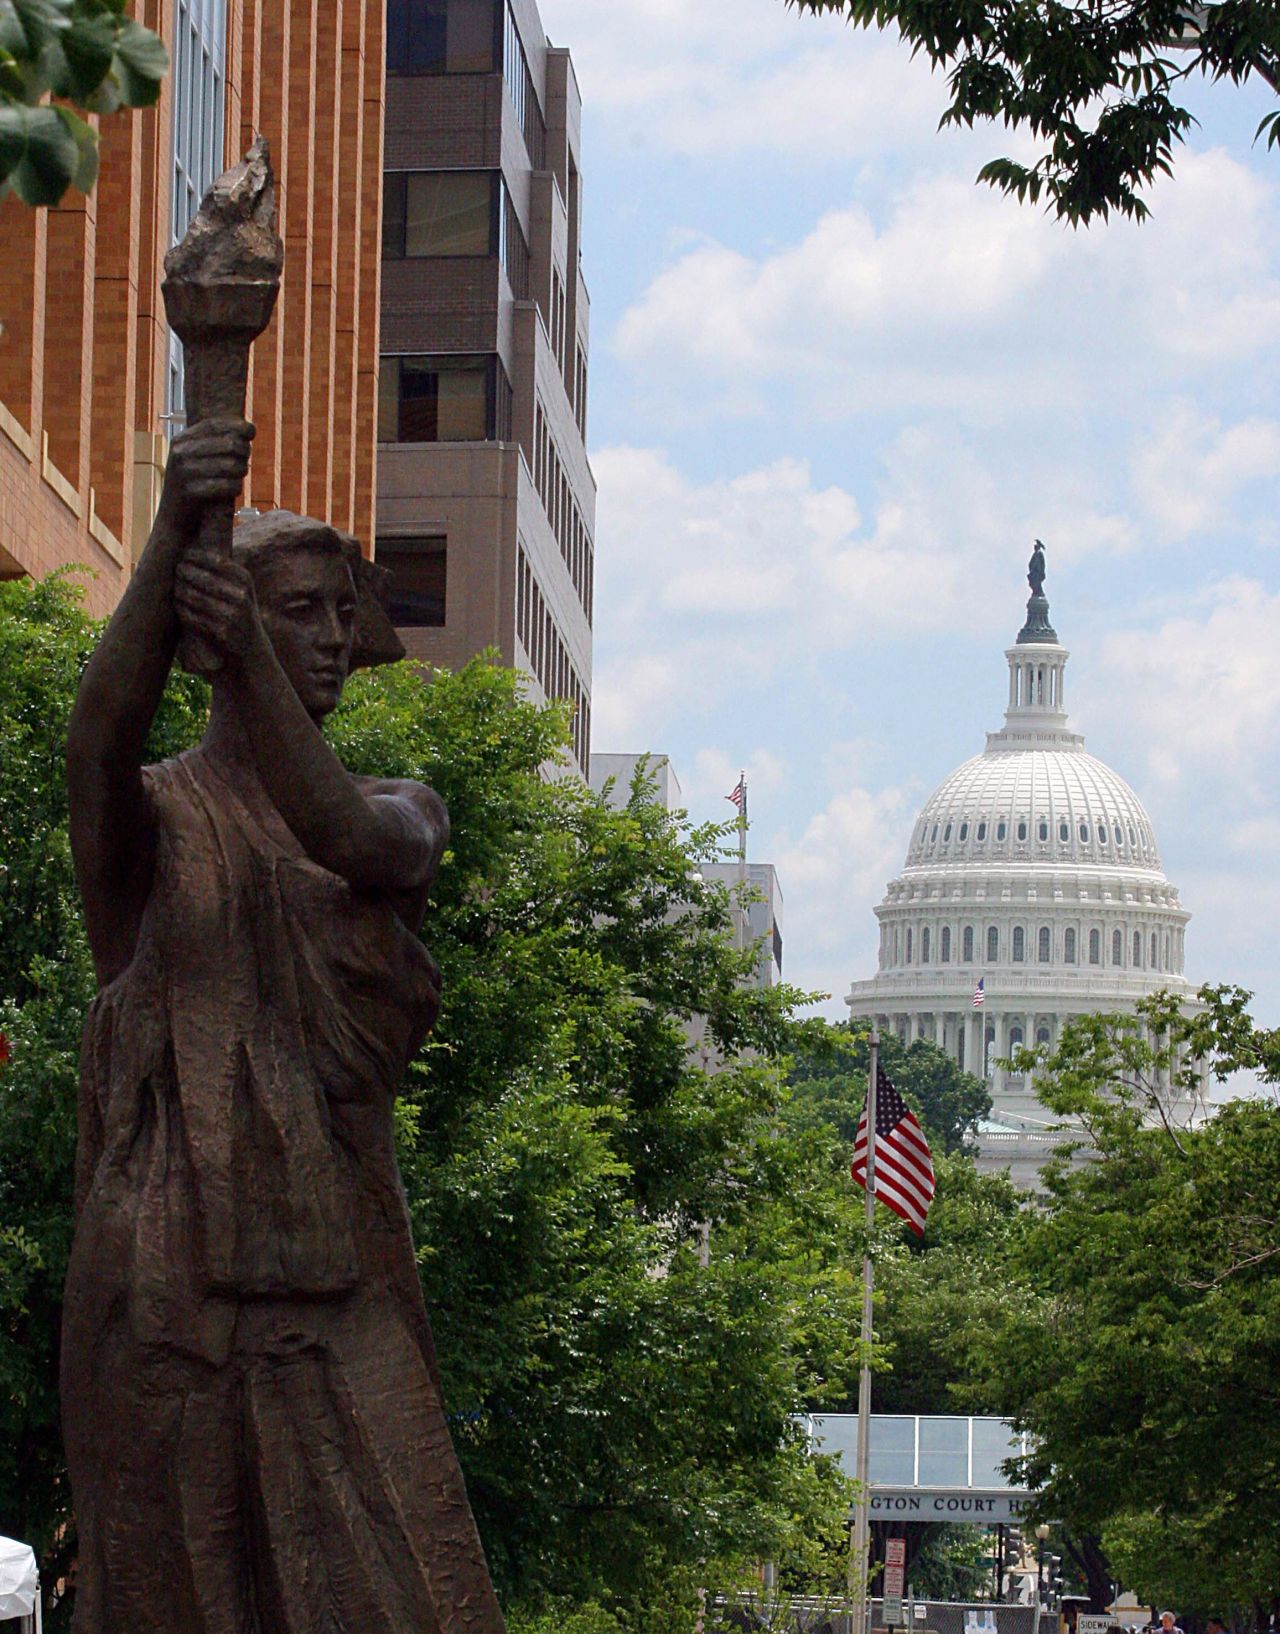 A replica of the statue was erected in Washington, DC, where it's known as the Victims of Communism Memorial.